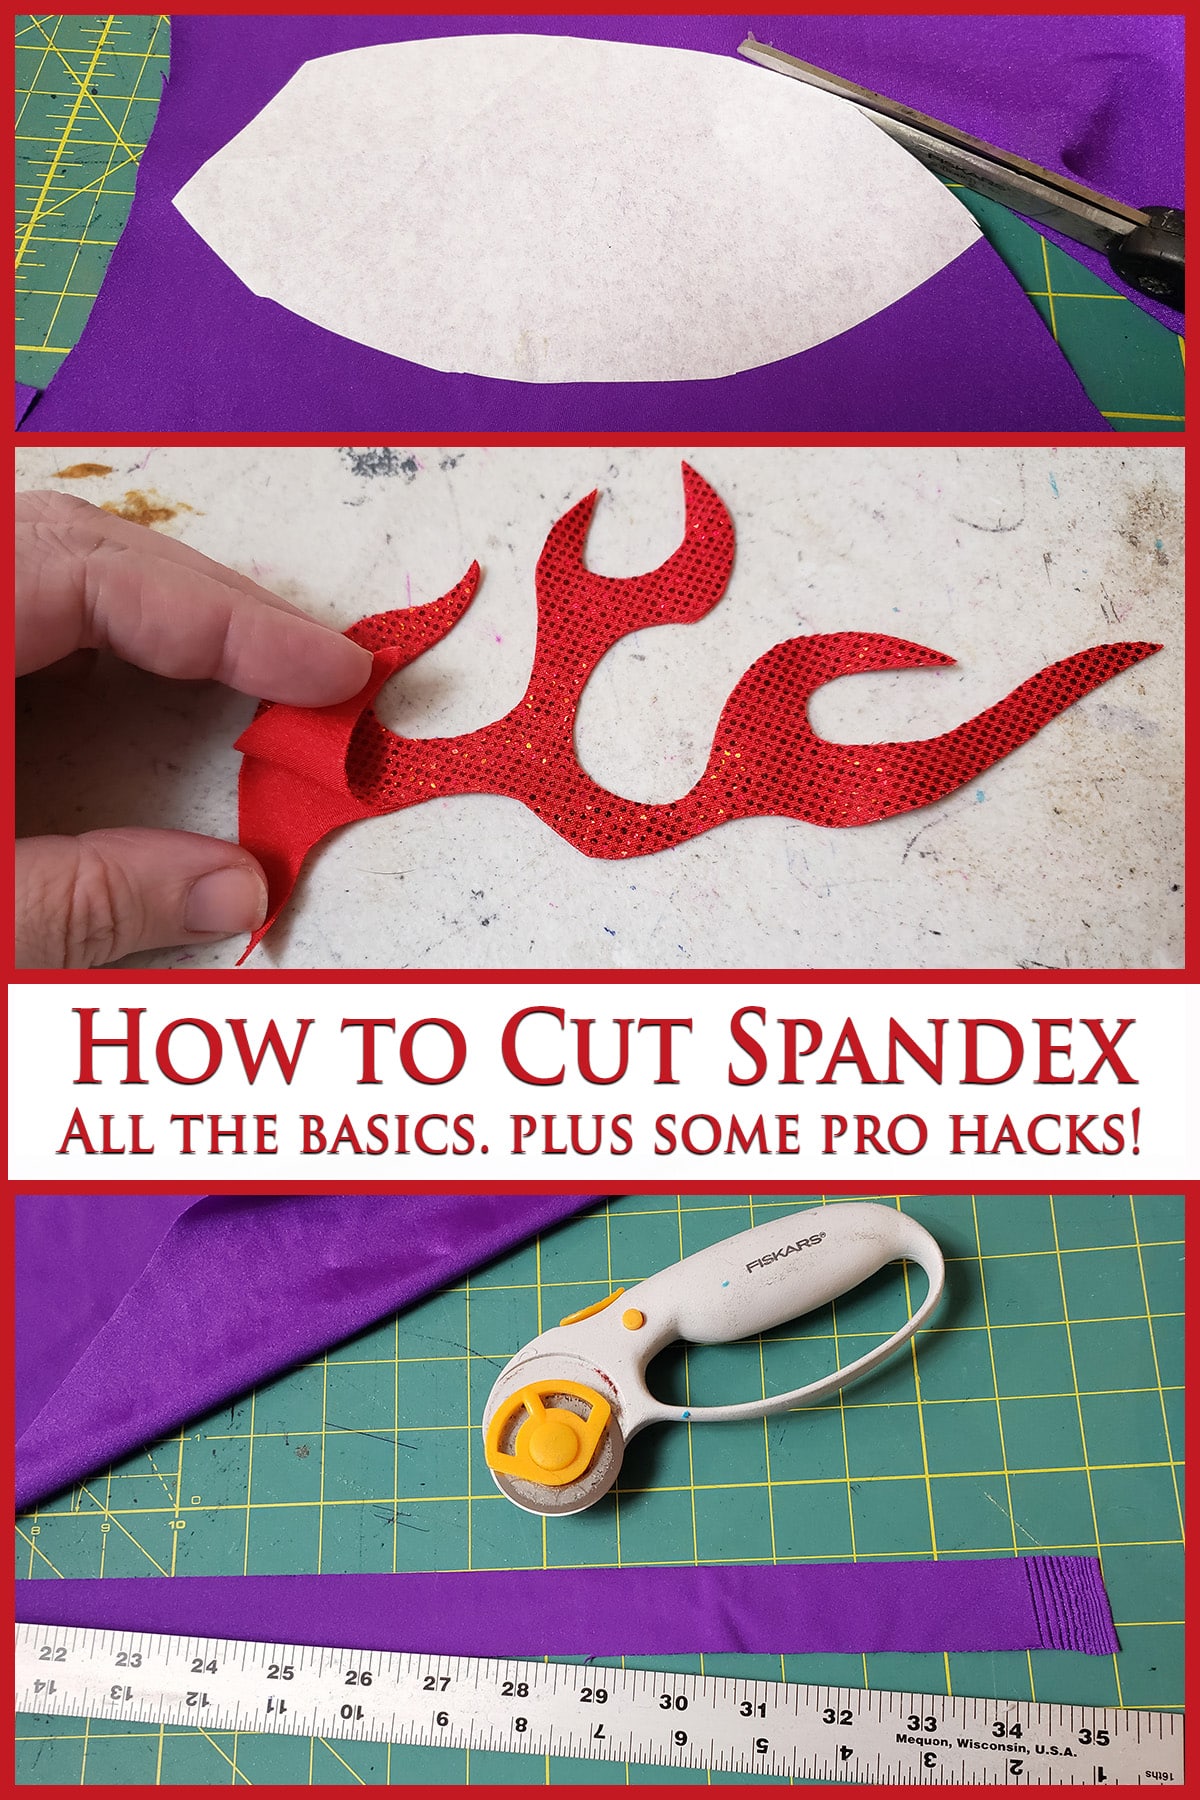 A 3 part compilation image showing various images of spandex being cut, with red lettering that says How to cut spandex. All the basics, plus some pro hacks.